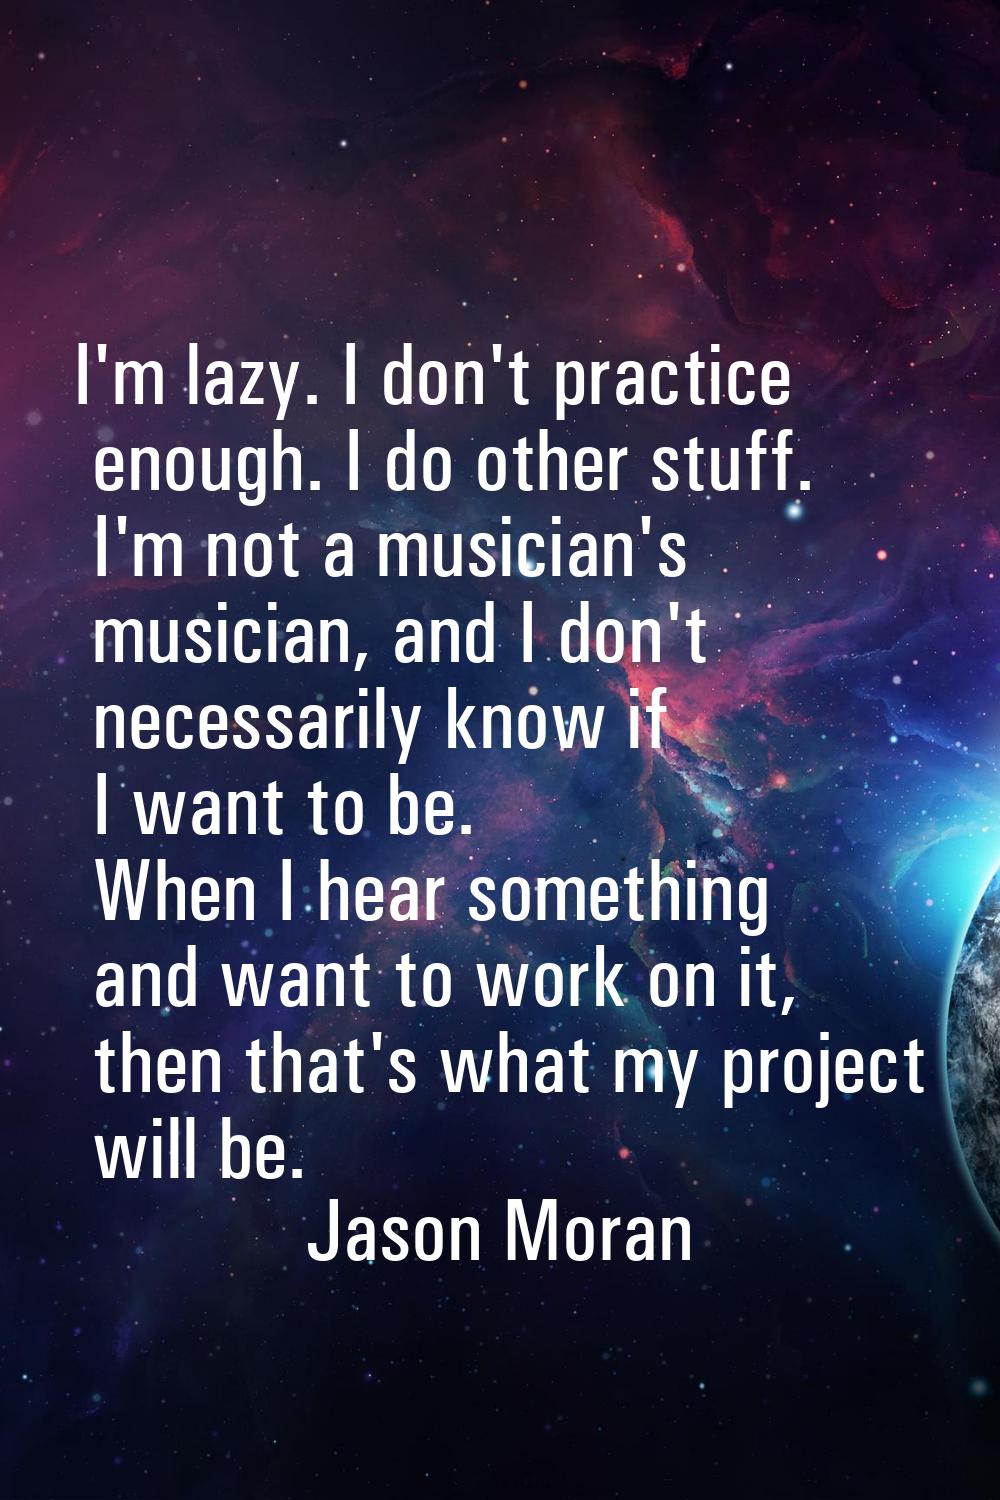 I'm lazy. I don't practice enough. I do other stuff. I'm not a musician's musician, and I don't nec